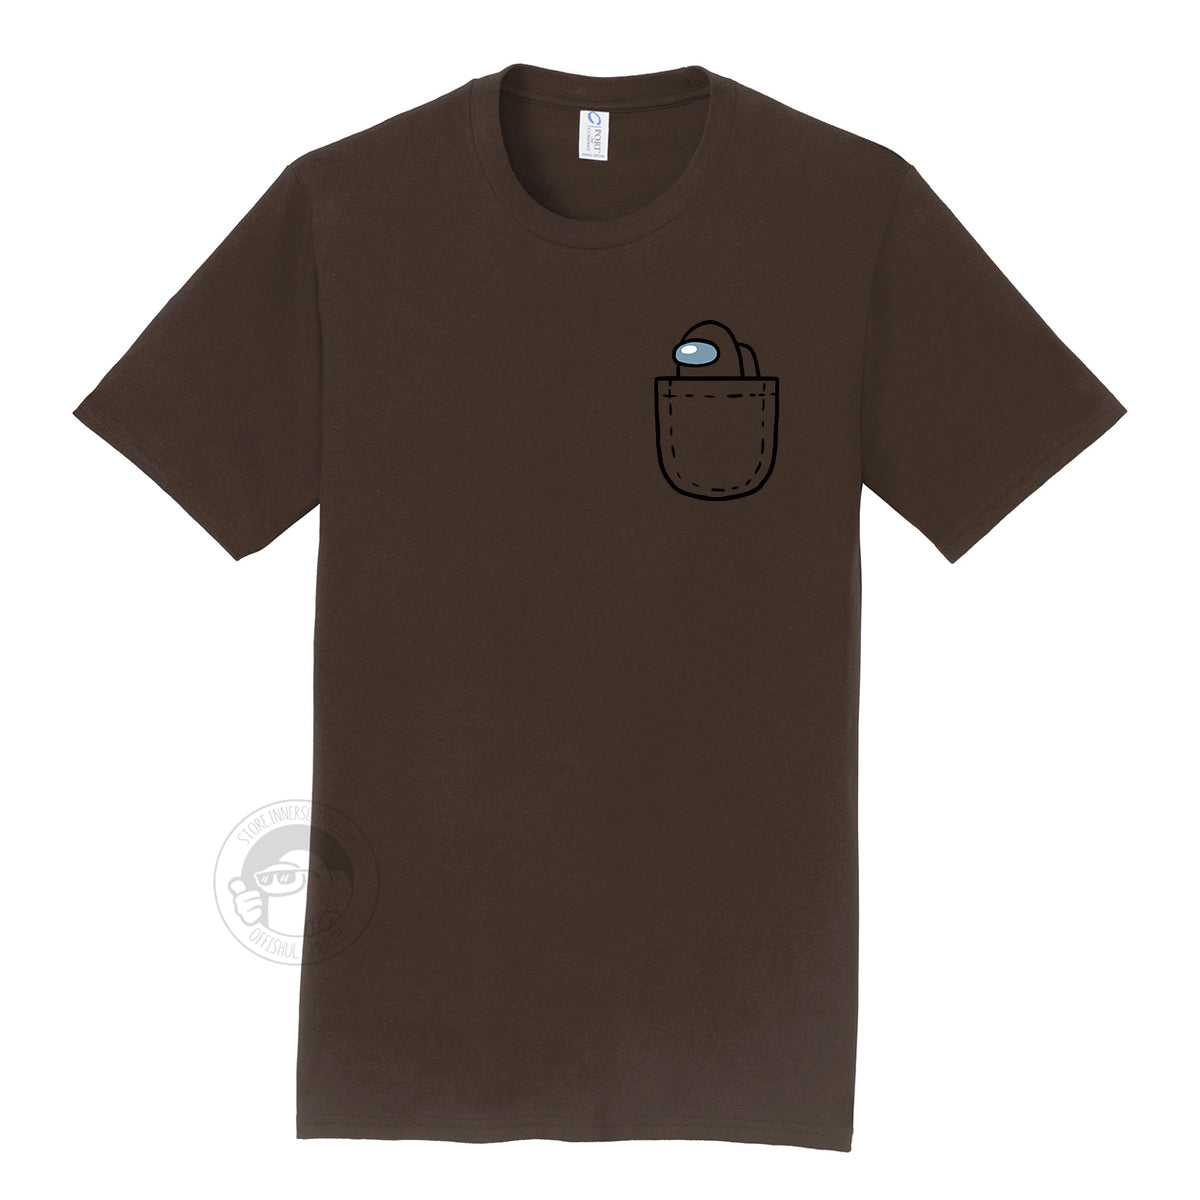 A product photograph of the Among Us: Mini Crewmate Pocket Tee in brown. The shirt art depicts a fake pocket and a small crewmate peeking out of it. The crewmate is the same color as the rest of the shirt.